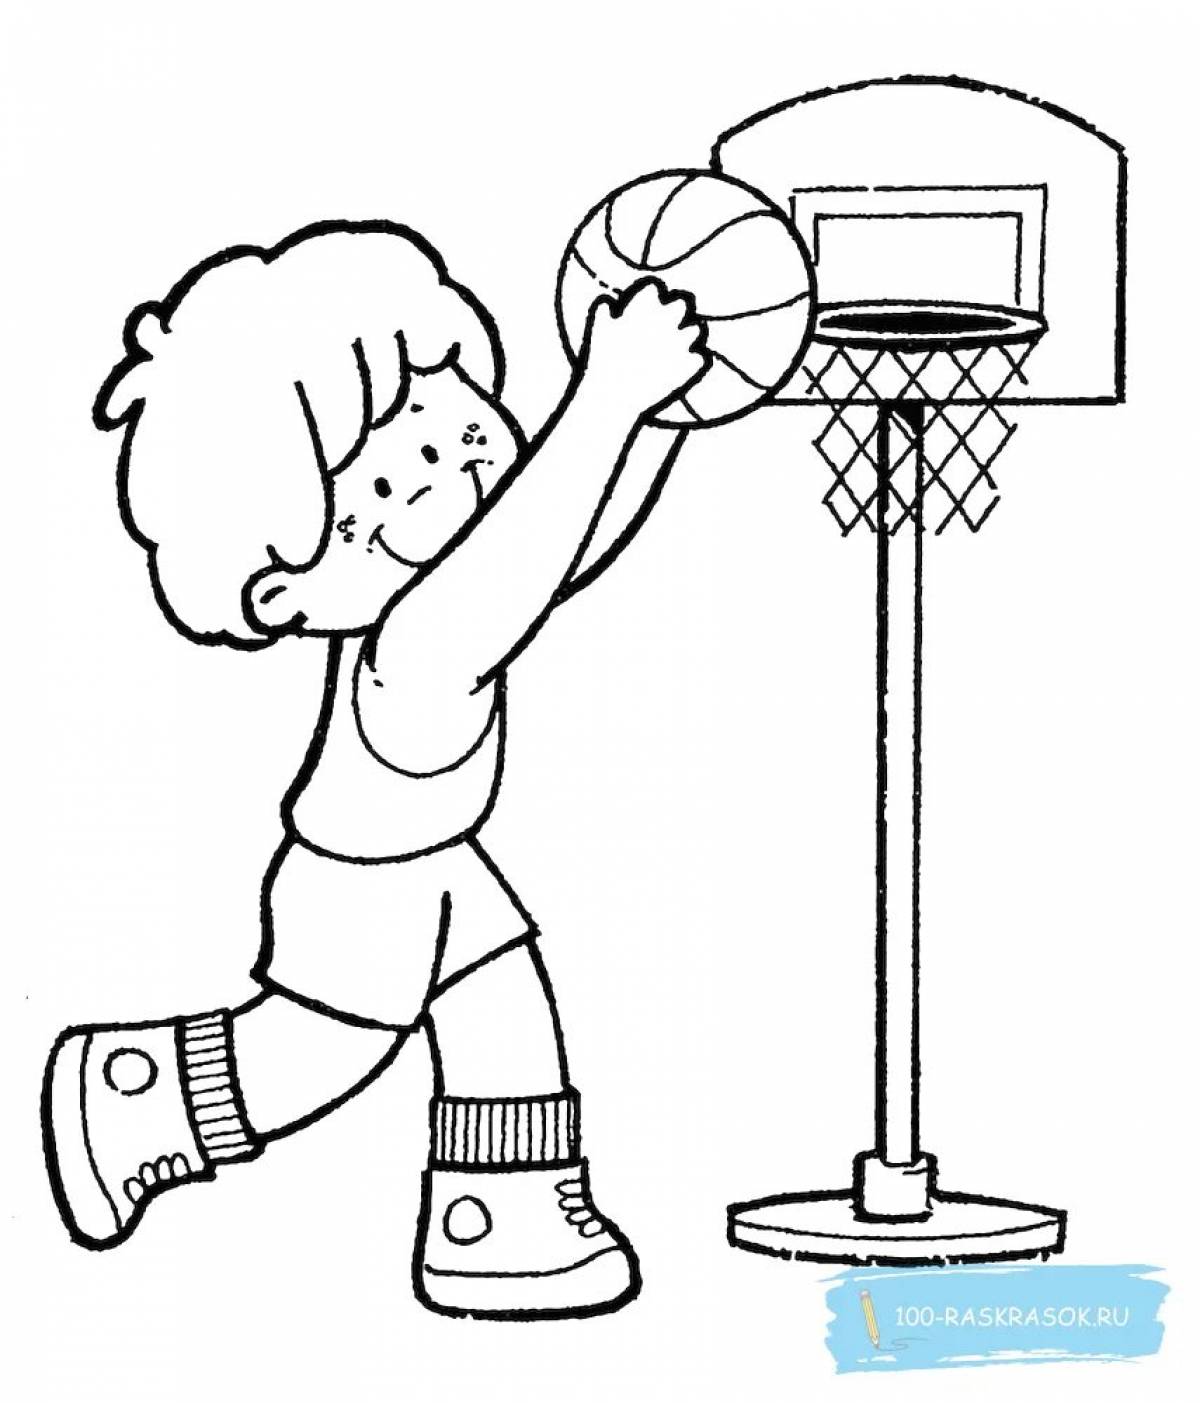 Funny sports coloring pages for preschoolers